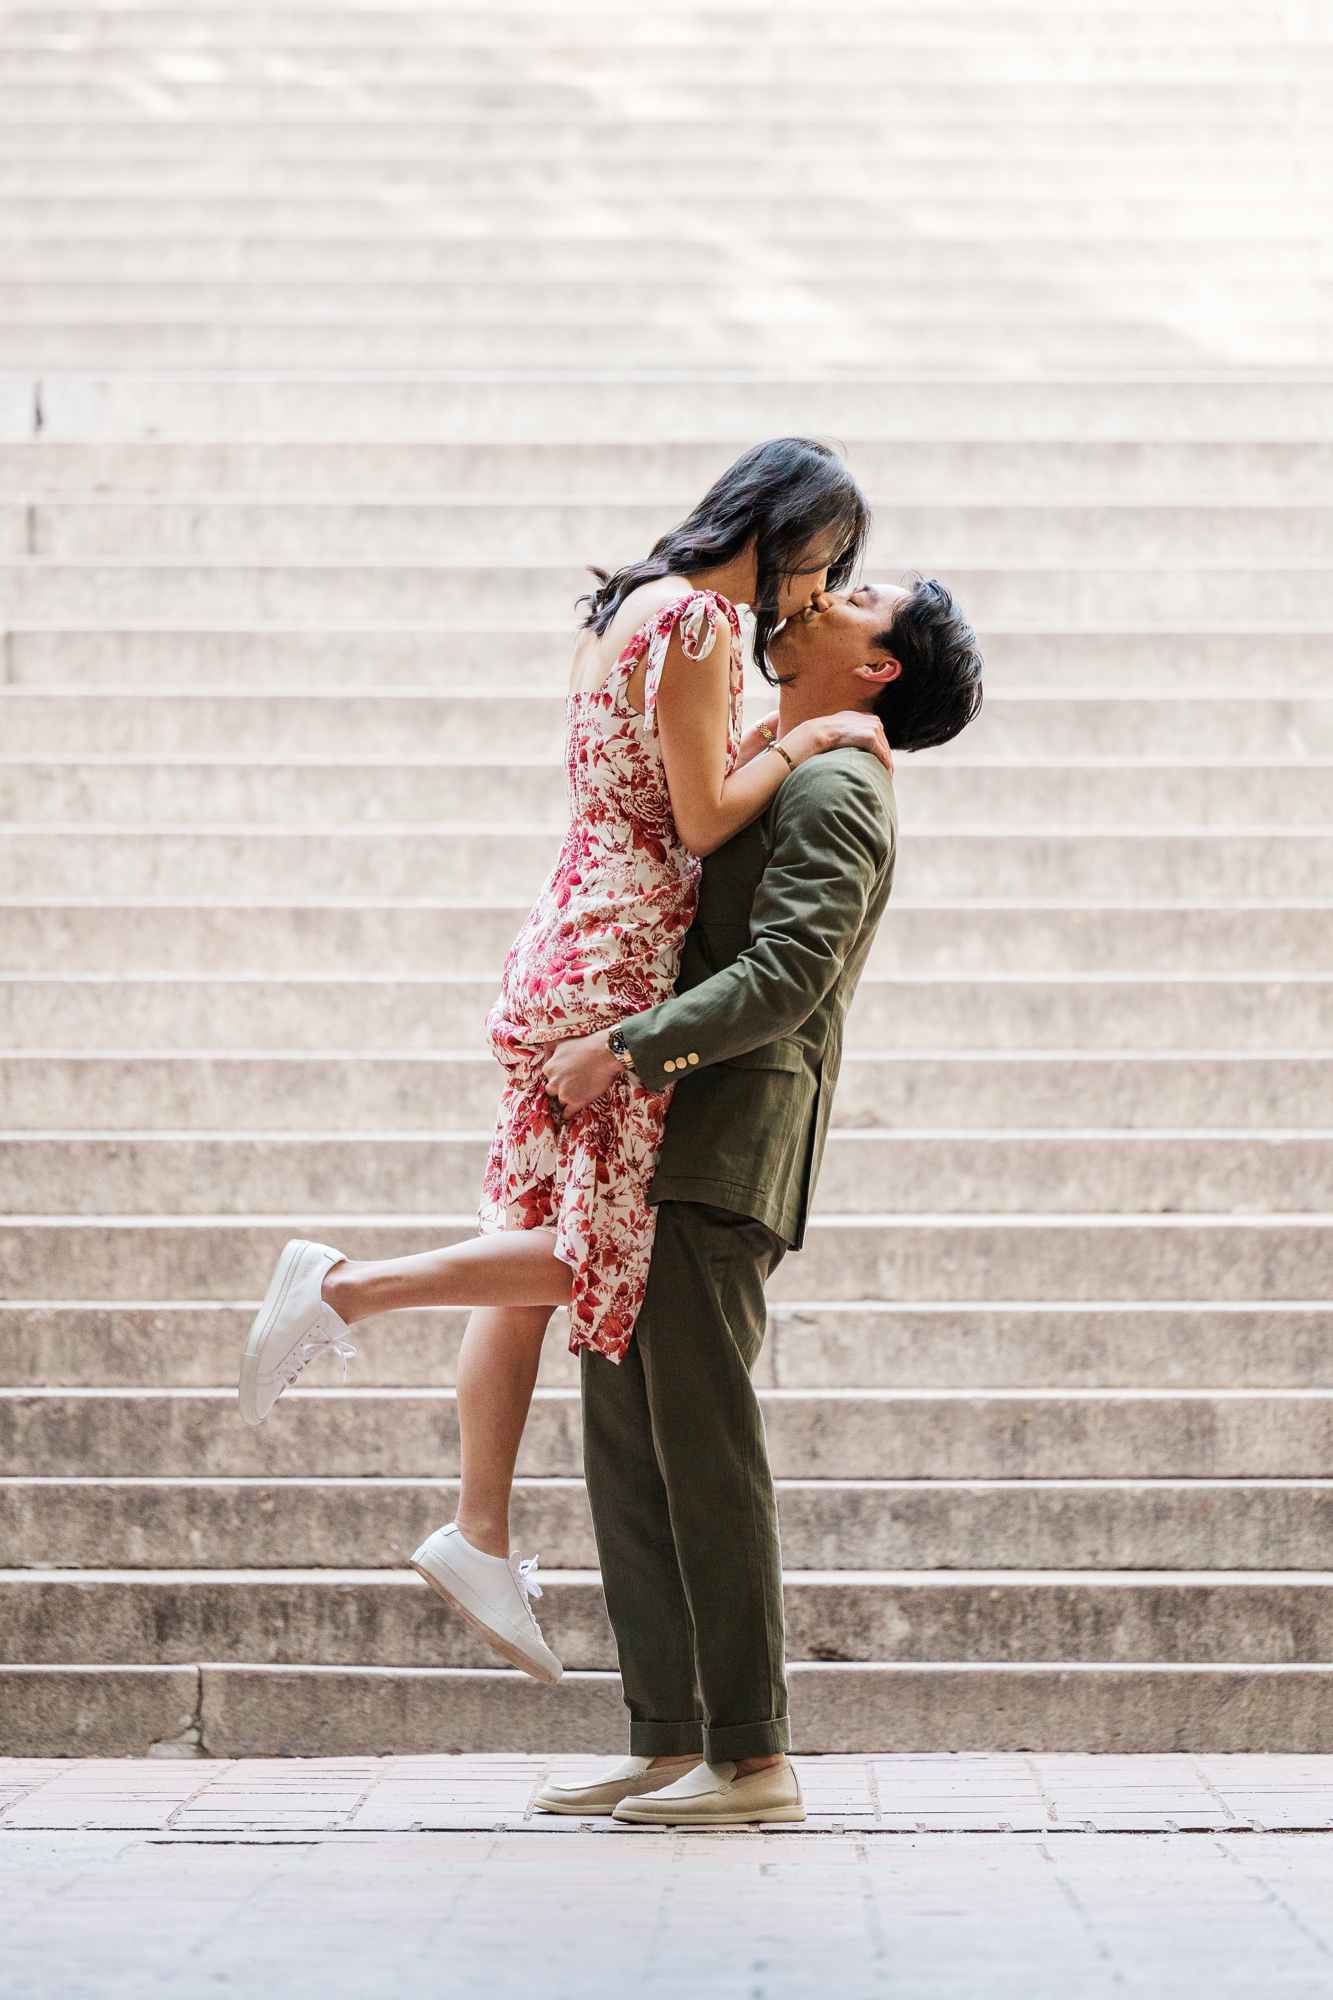 Flawless Engagement Photos With Cherry Blossoms in NYC